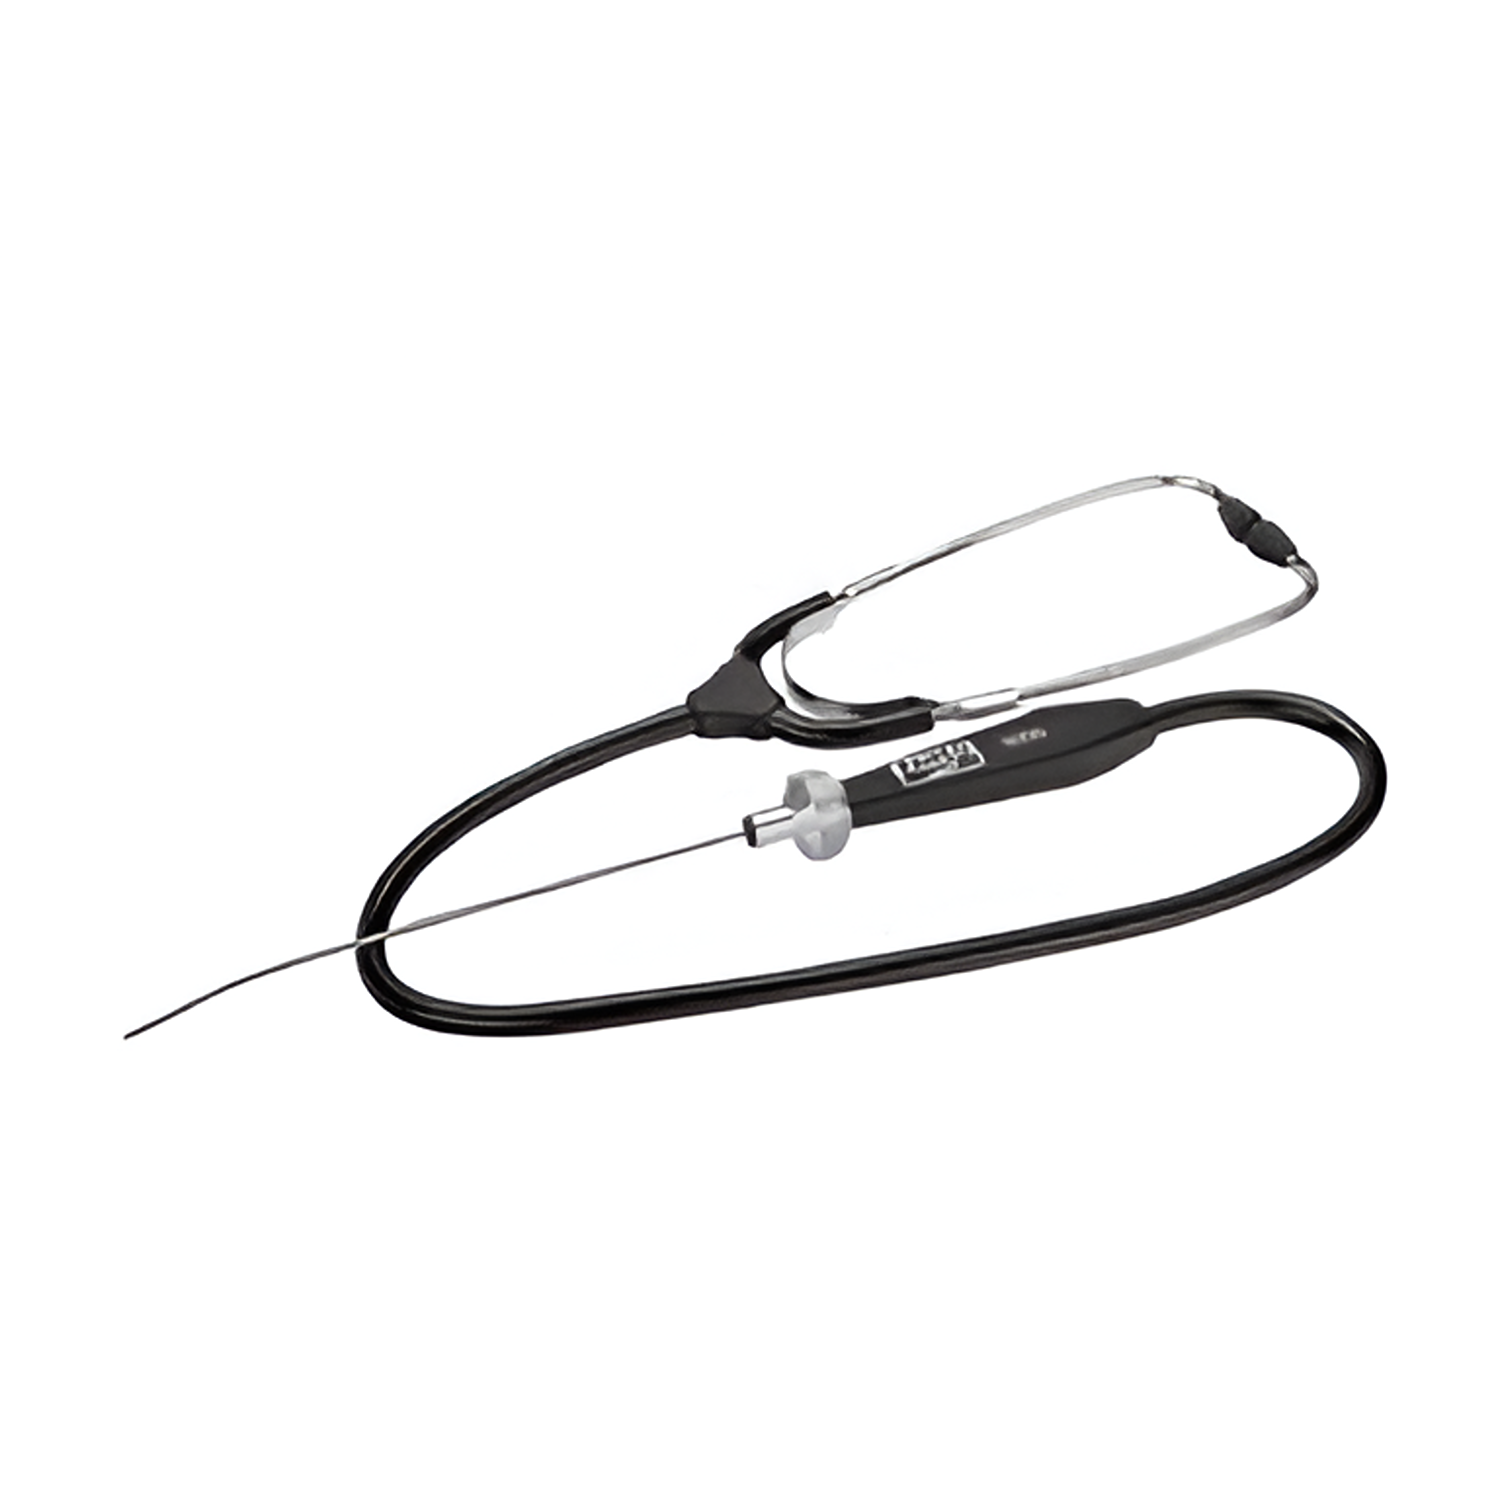 BAHCO 5050 Stethoscopes with Steel Probe (BAHCO Tools) - Premium Stethoscopes from BAHCO - Shop now at Yew Aik.